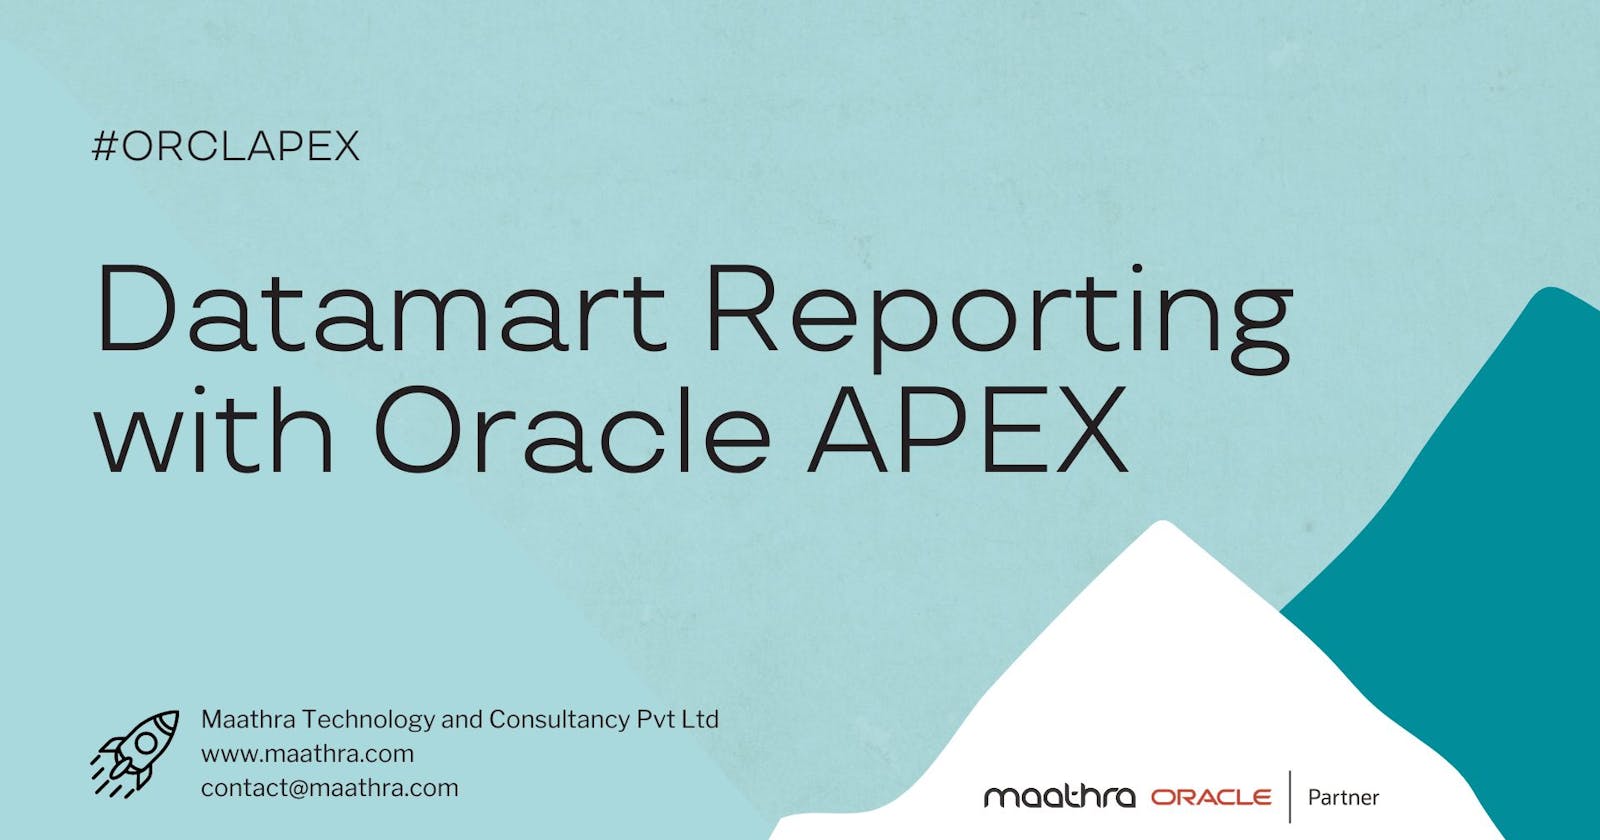 Oracle APEX Use Cases: Datamart Reporting